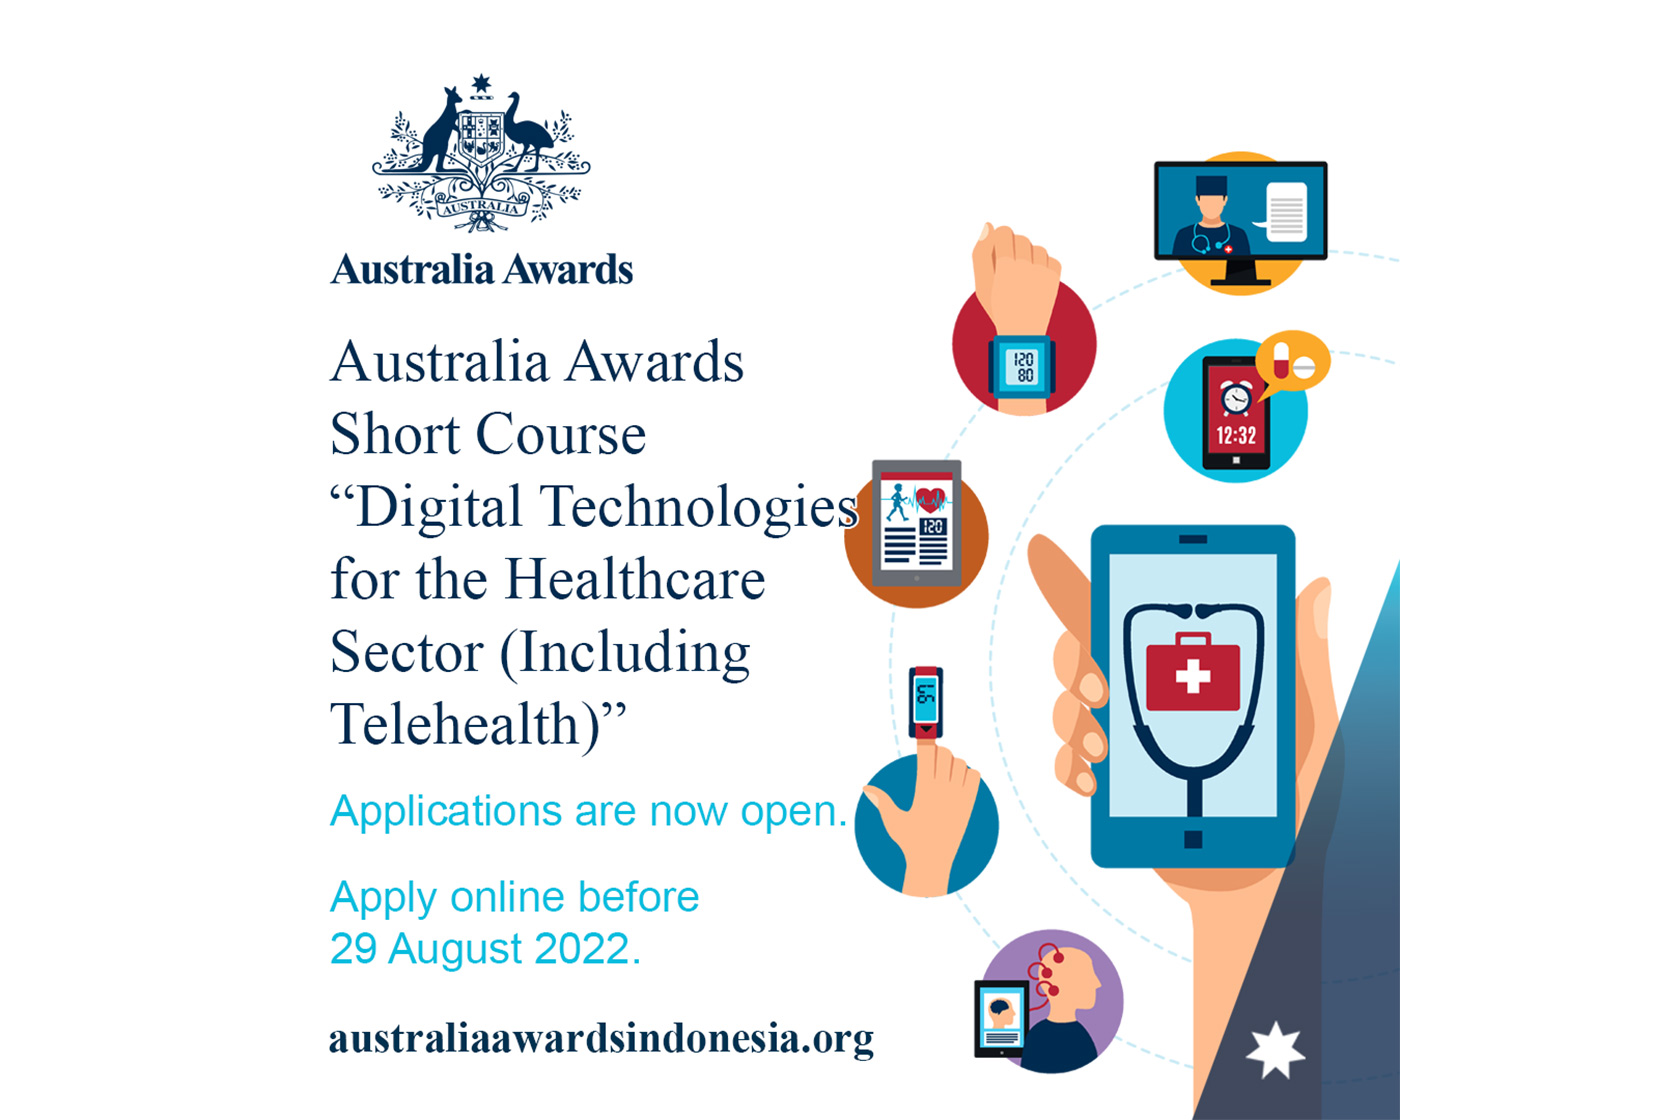 Apply Now for the Australia Awards Short Course on Digital Technologies for the Healthcare Sector (Including Telehealth)